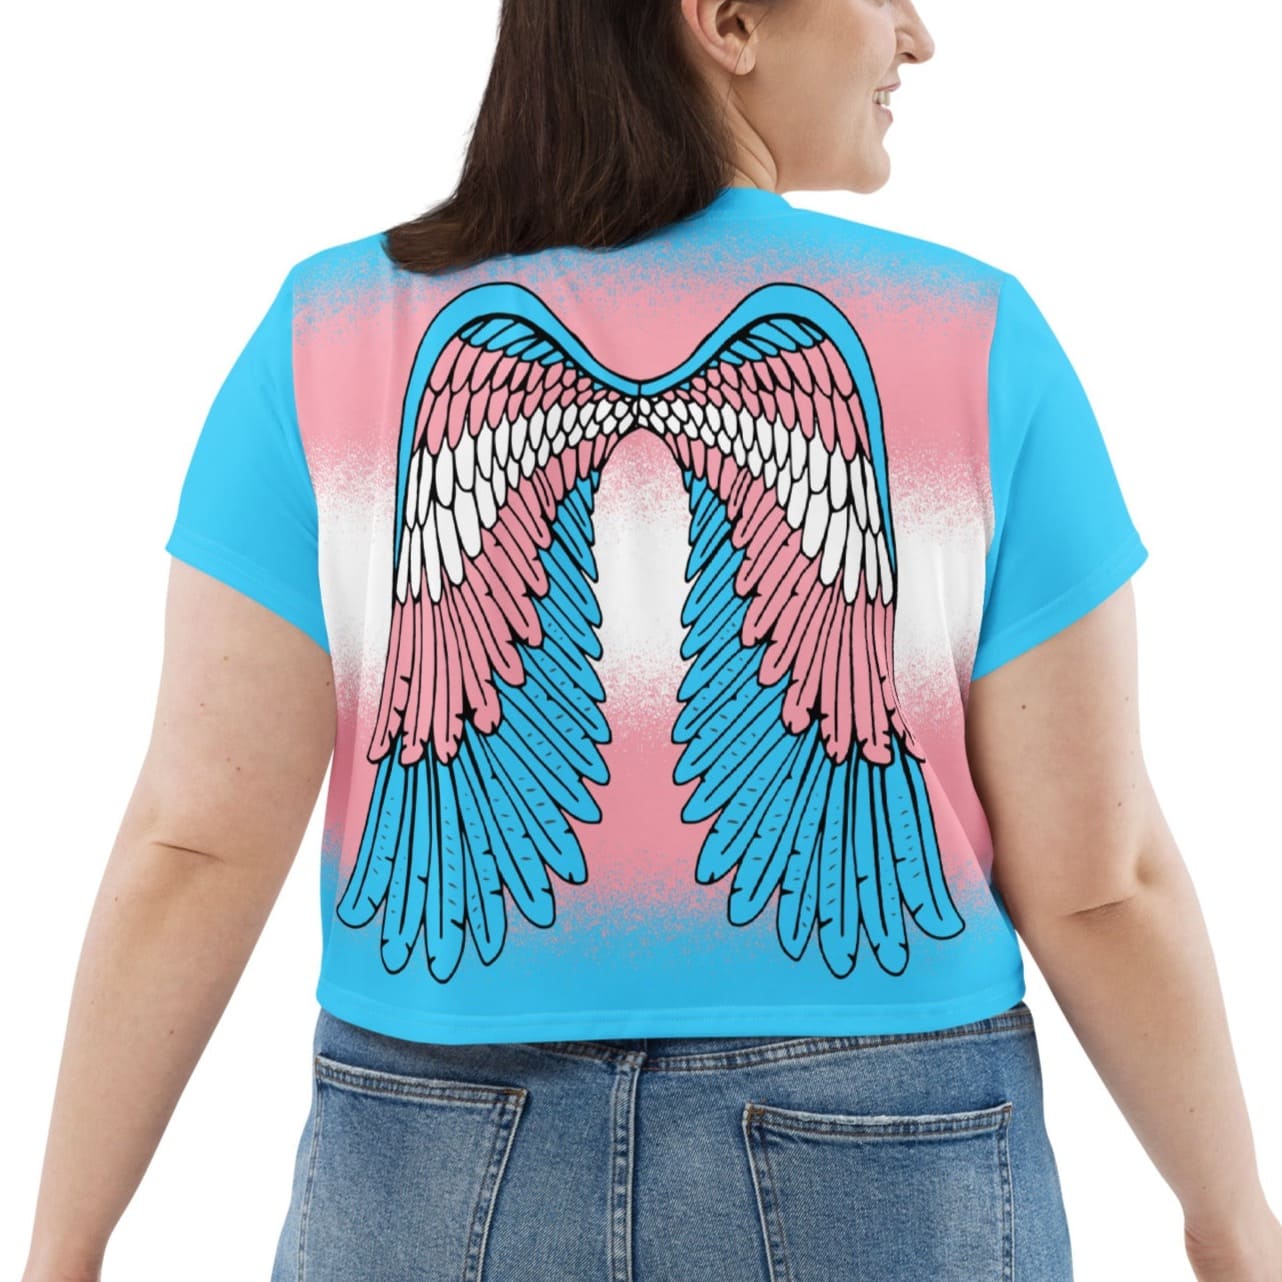 transgender crop top, trans pride cropped shirt with wings on the back, back